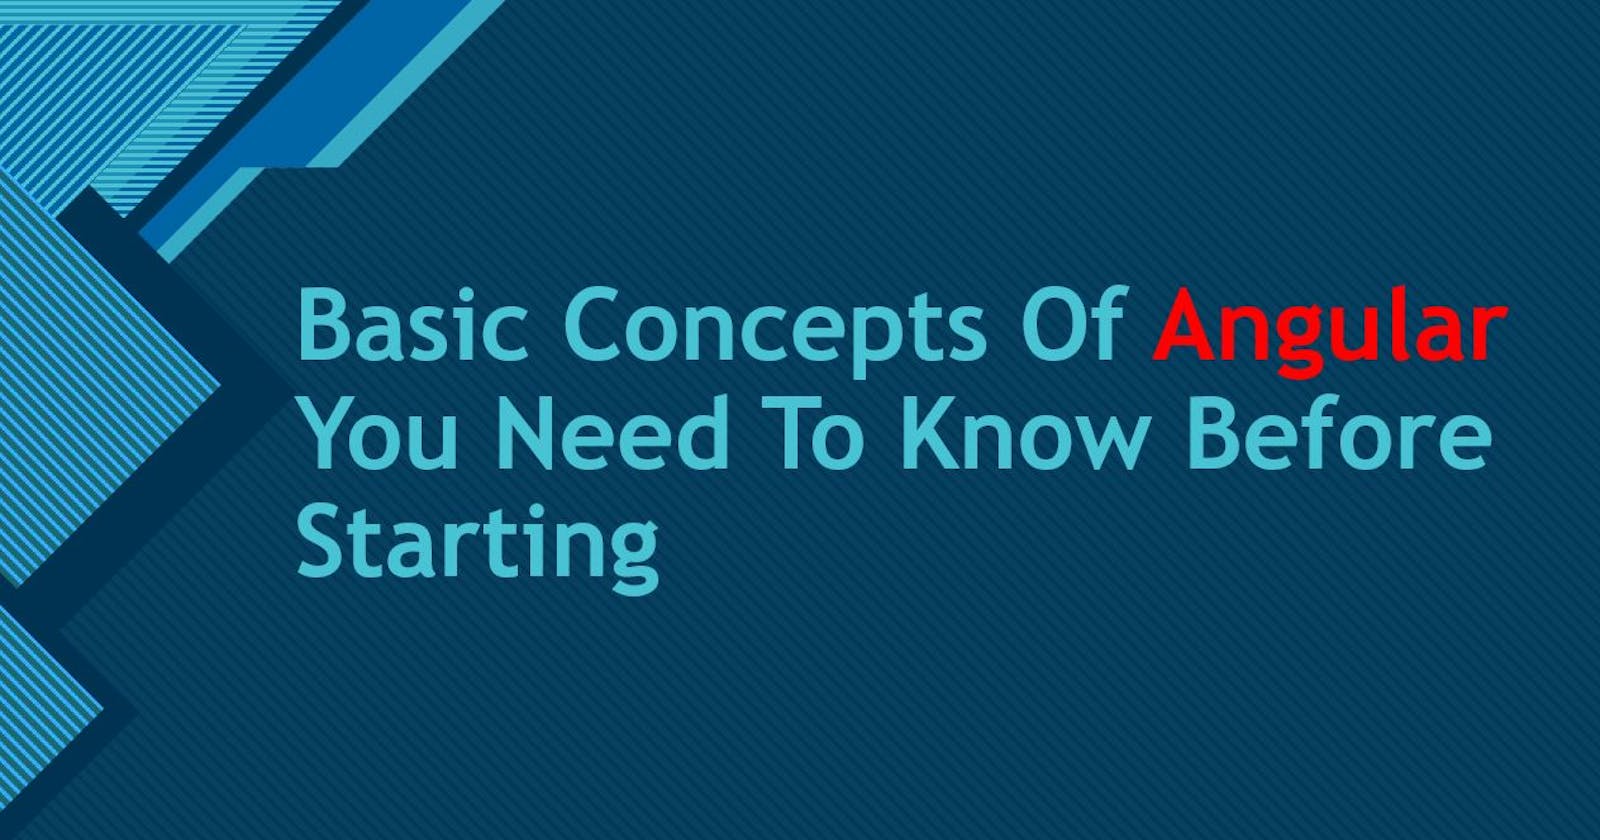 Introduction To Basic Concepts Of Angular You Need To Know Before Starting